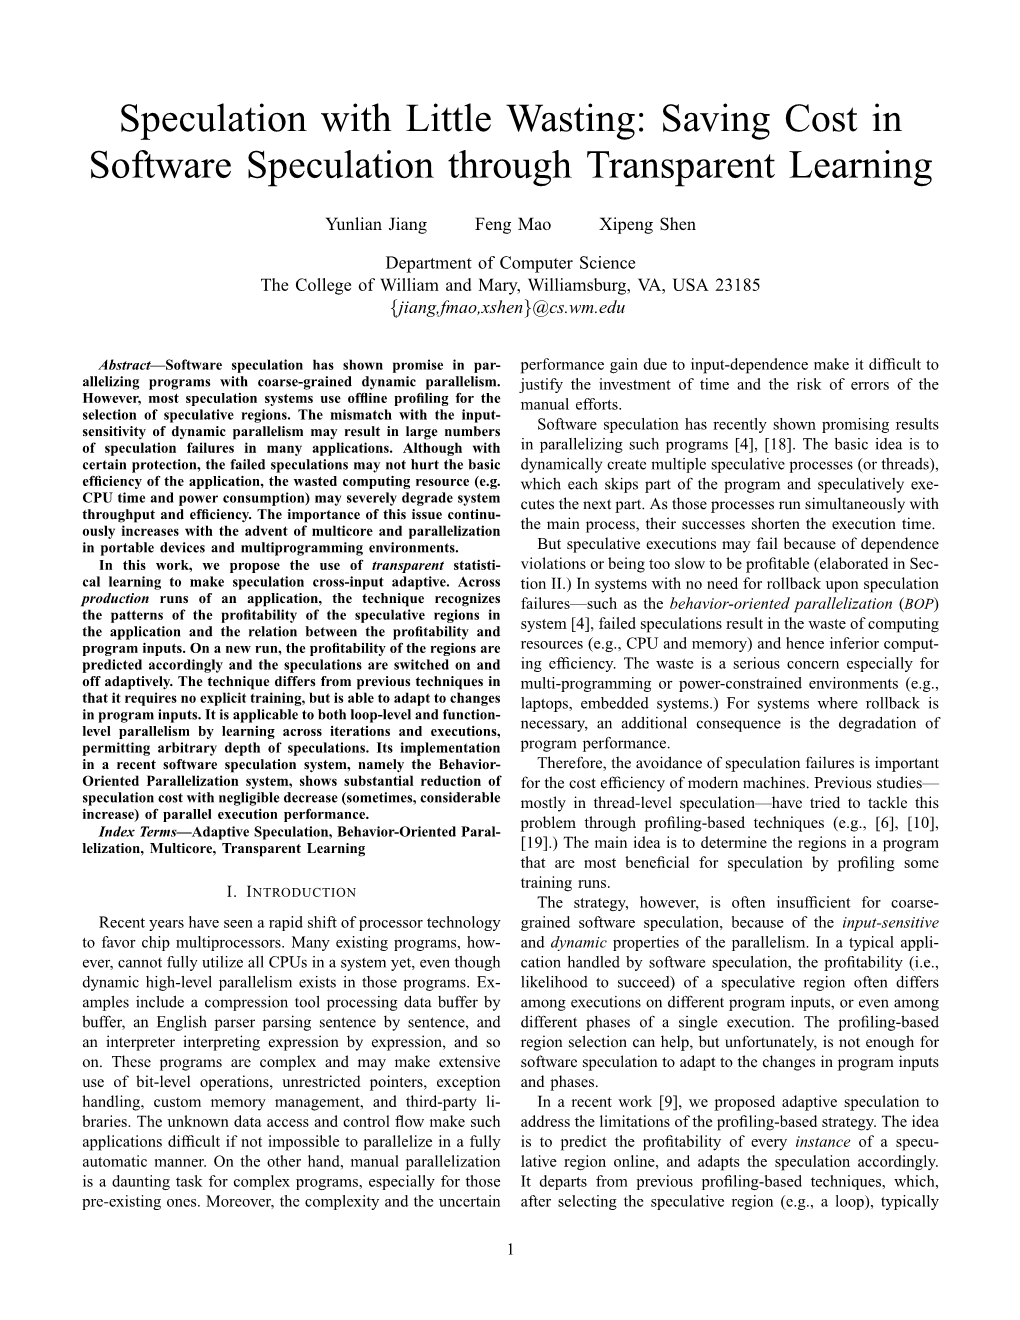 Speculation with Little Wasting: Saving Cost in Software Speculation Through Transparent Learning